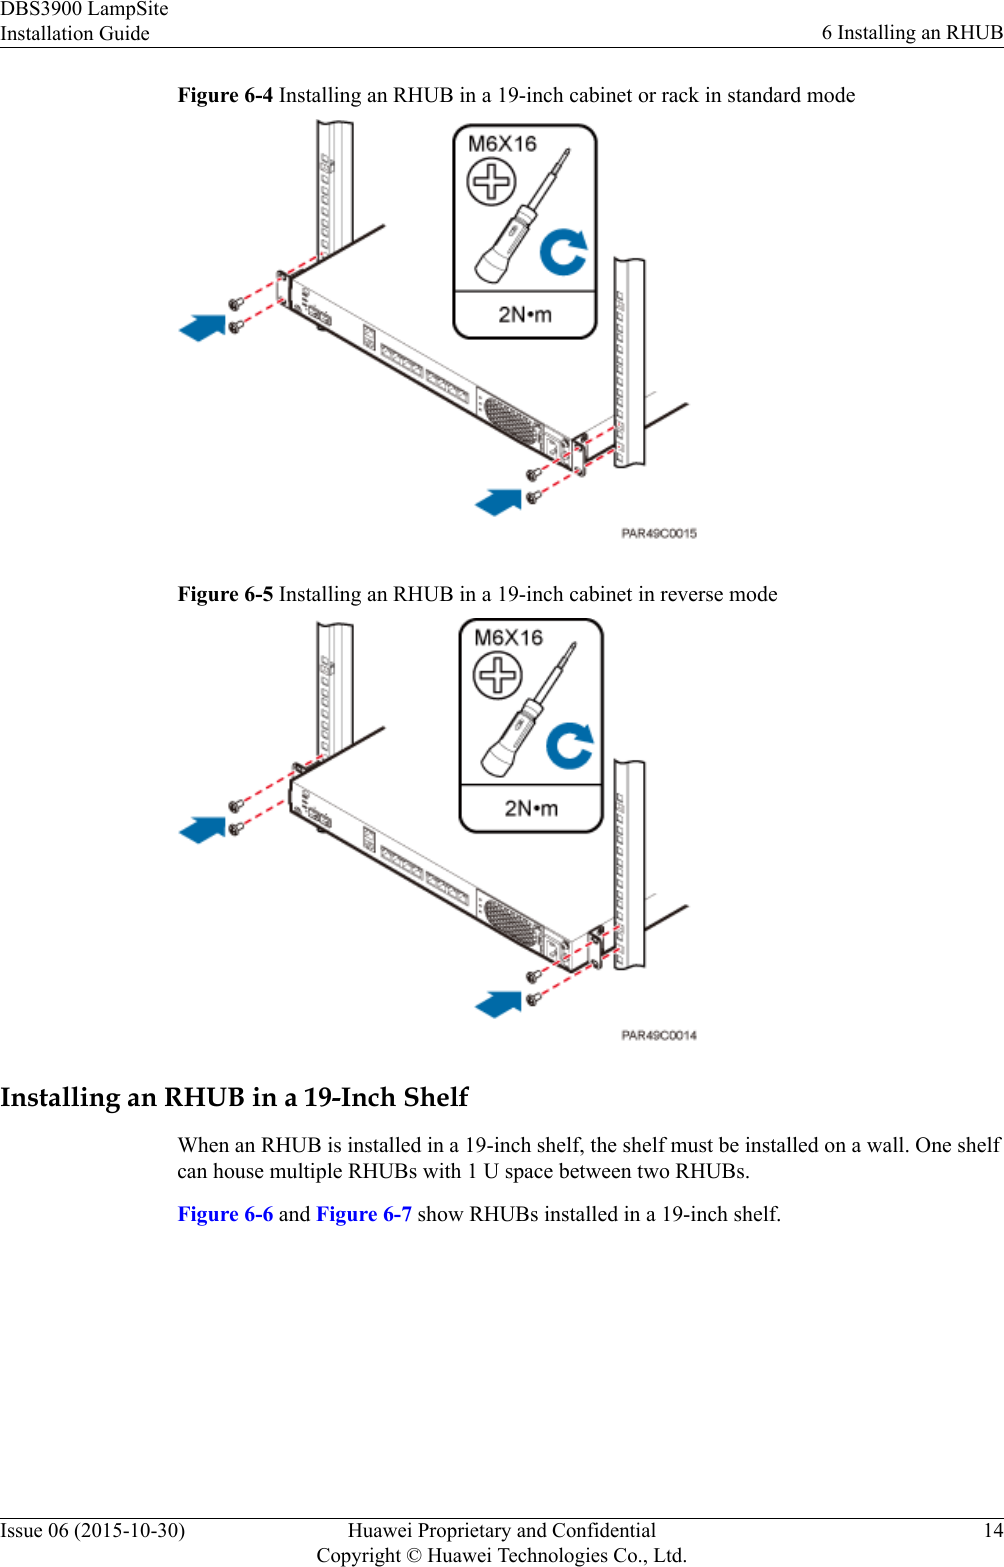 Figure 6-4 Installing an RHUB in a 19-inch cabinet or rack in standard modeFigure 6-5 Installing an RHUB in a 19-inch cabinet in reverse modeInstalling an RHUB in a 19-Inch ShelfWhen an RHUB is installed in a 19-inch shelf, the shelf must be installed on a wall. One shelfcan house multiple RHUBs with 1 U space between two RHUBs.Figure 6-6 and Figure 6-7 show RHUBs installed in a 19-inch shelf.DBS3900 LampSiteInstallation Guide 6 Installing an RHUBIssue 06 (2015-10-30) Huawei Proprietary and ConfidentialCopyright © Huawei Technologies Co., Ltd.14